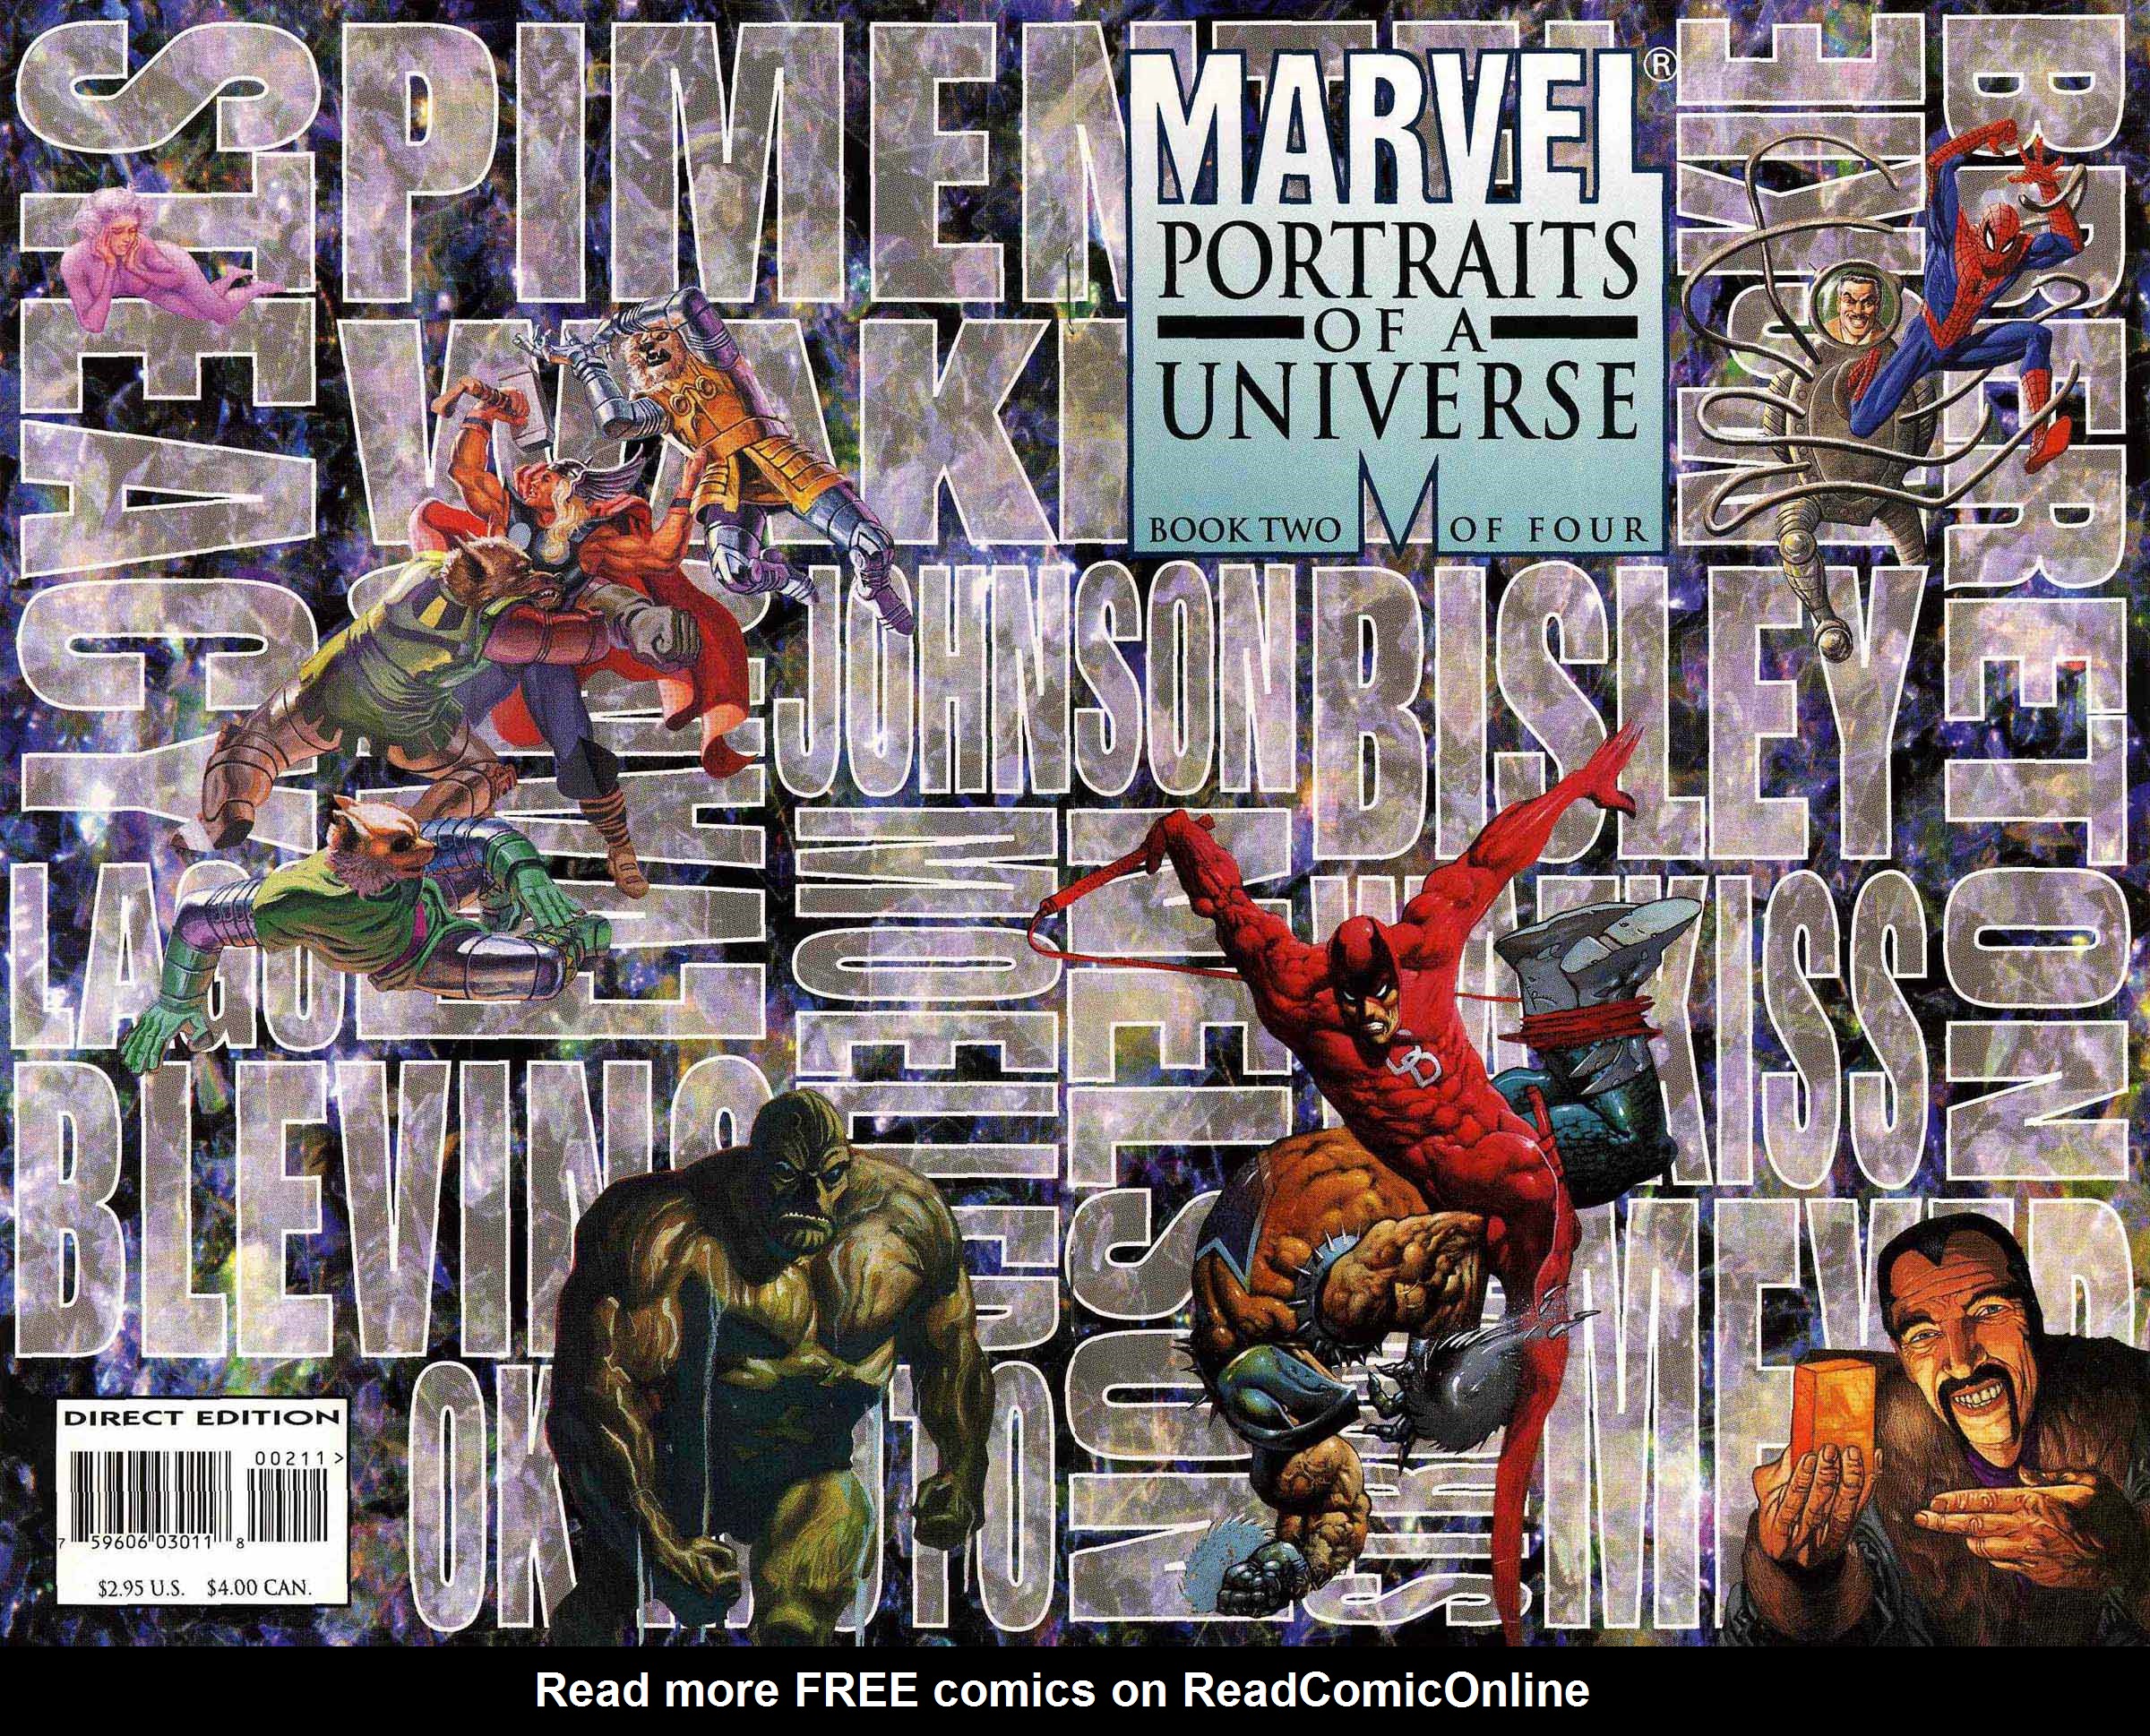 Read online Marvels: Portraits comic -  Issue #2 - 1